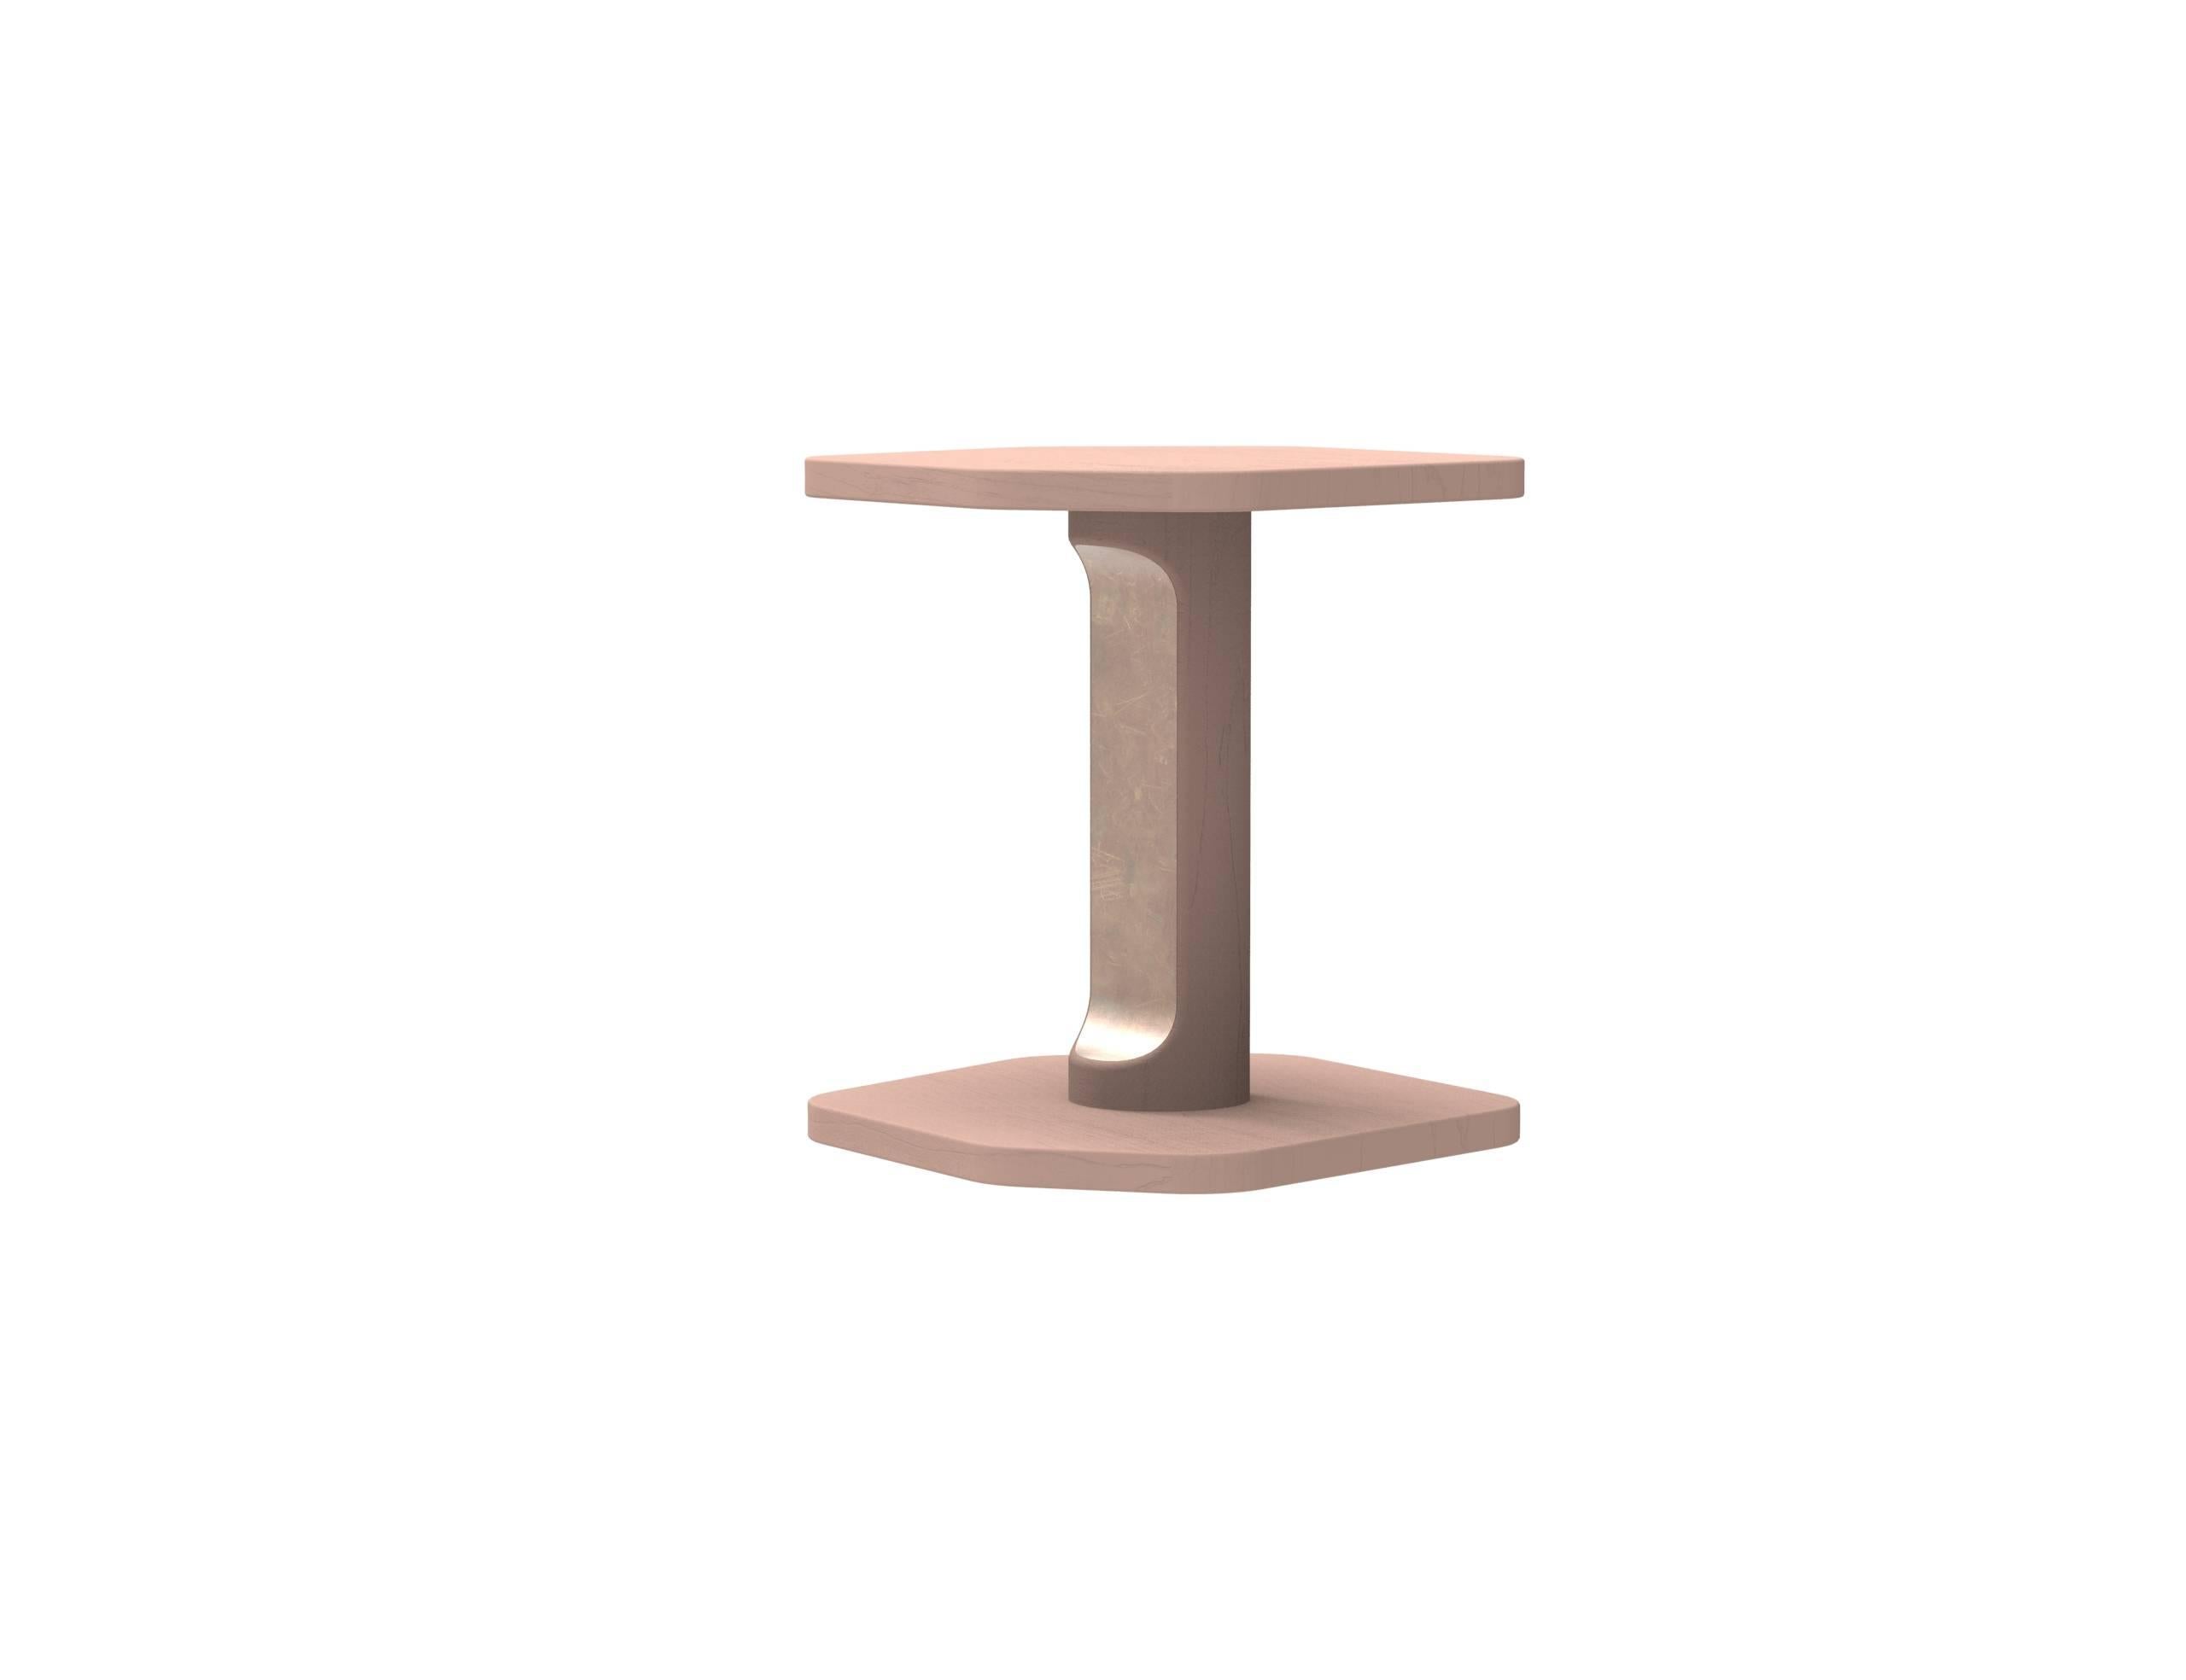 Heritage 'Flip' child chair by studiokinder in blush pigmented ash with copper

studiokinder
Contemporary, USA, 2017
Pigmented ash with copper
Color: Blush (Pink)
Measures: H 15